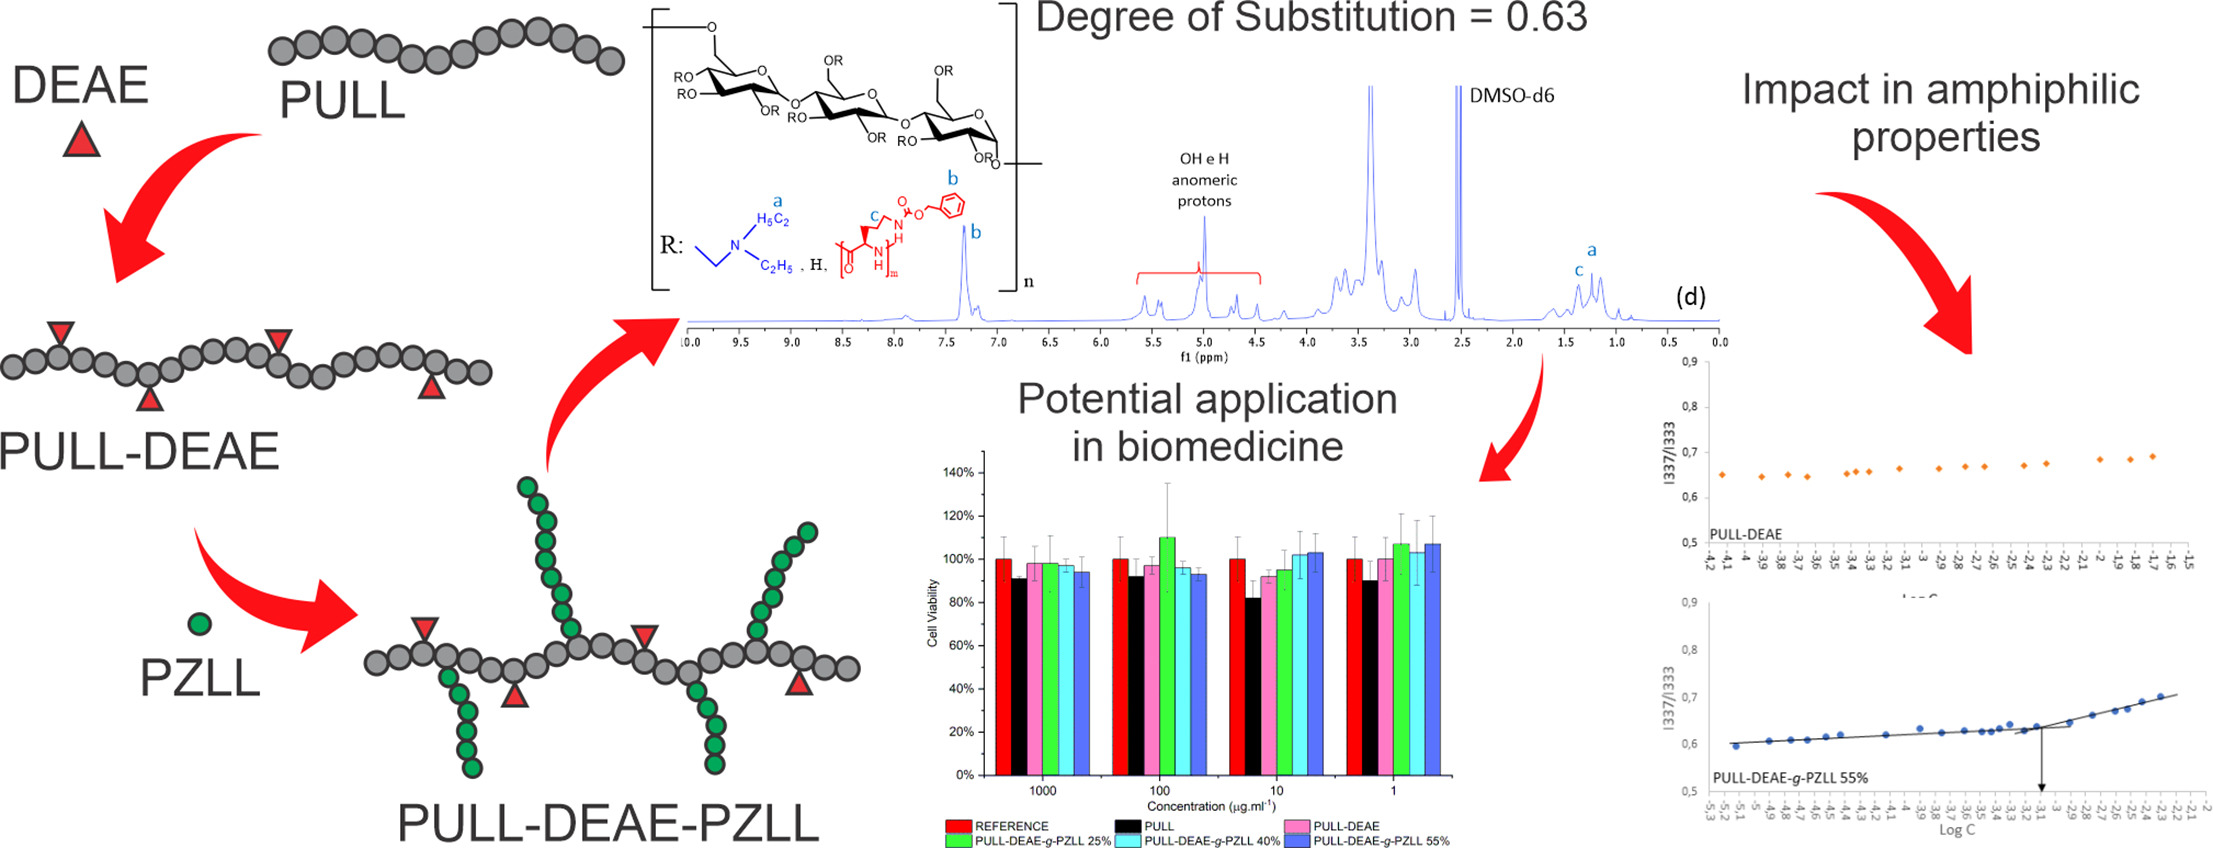 Preparation and characterization of cationic pullulan-based polymers with hydrophilic or amphiphilic characteristics for drug delivery